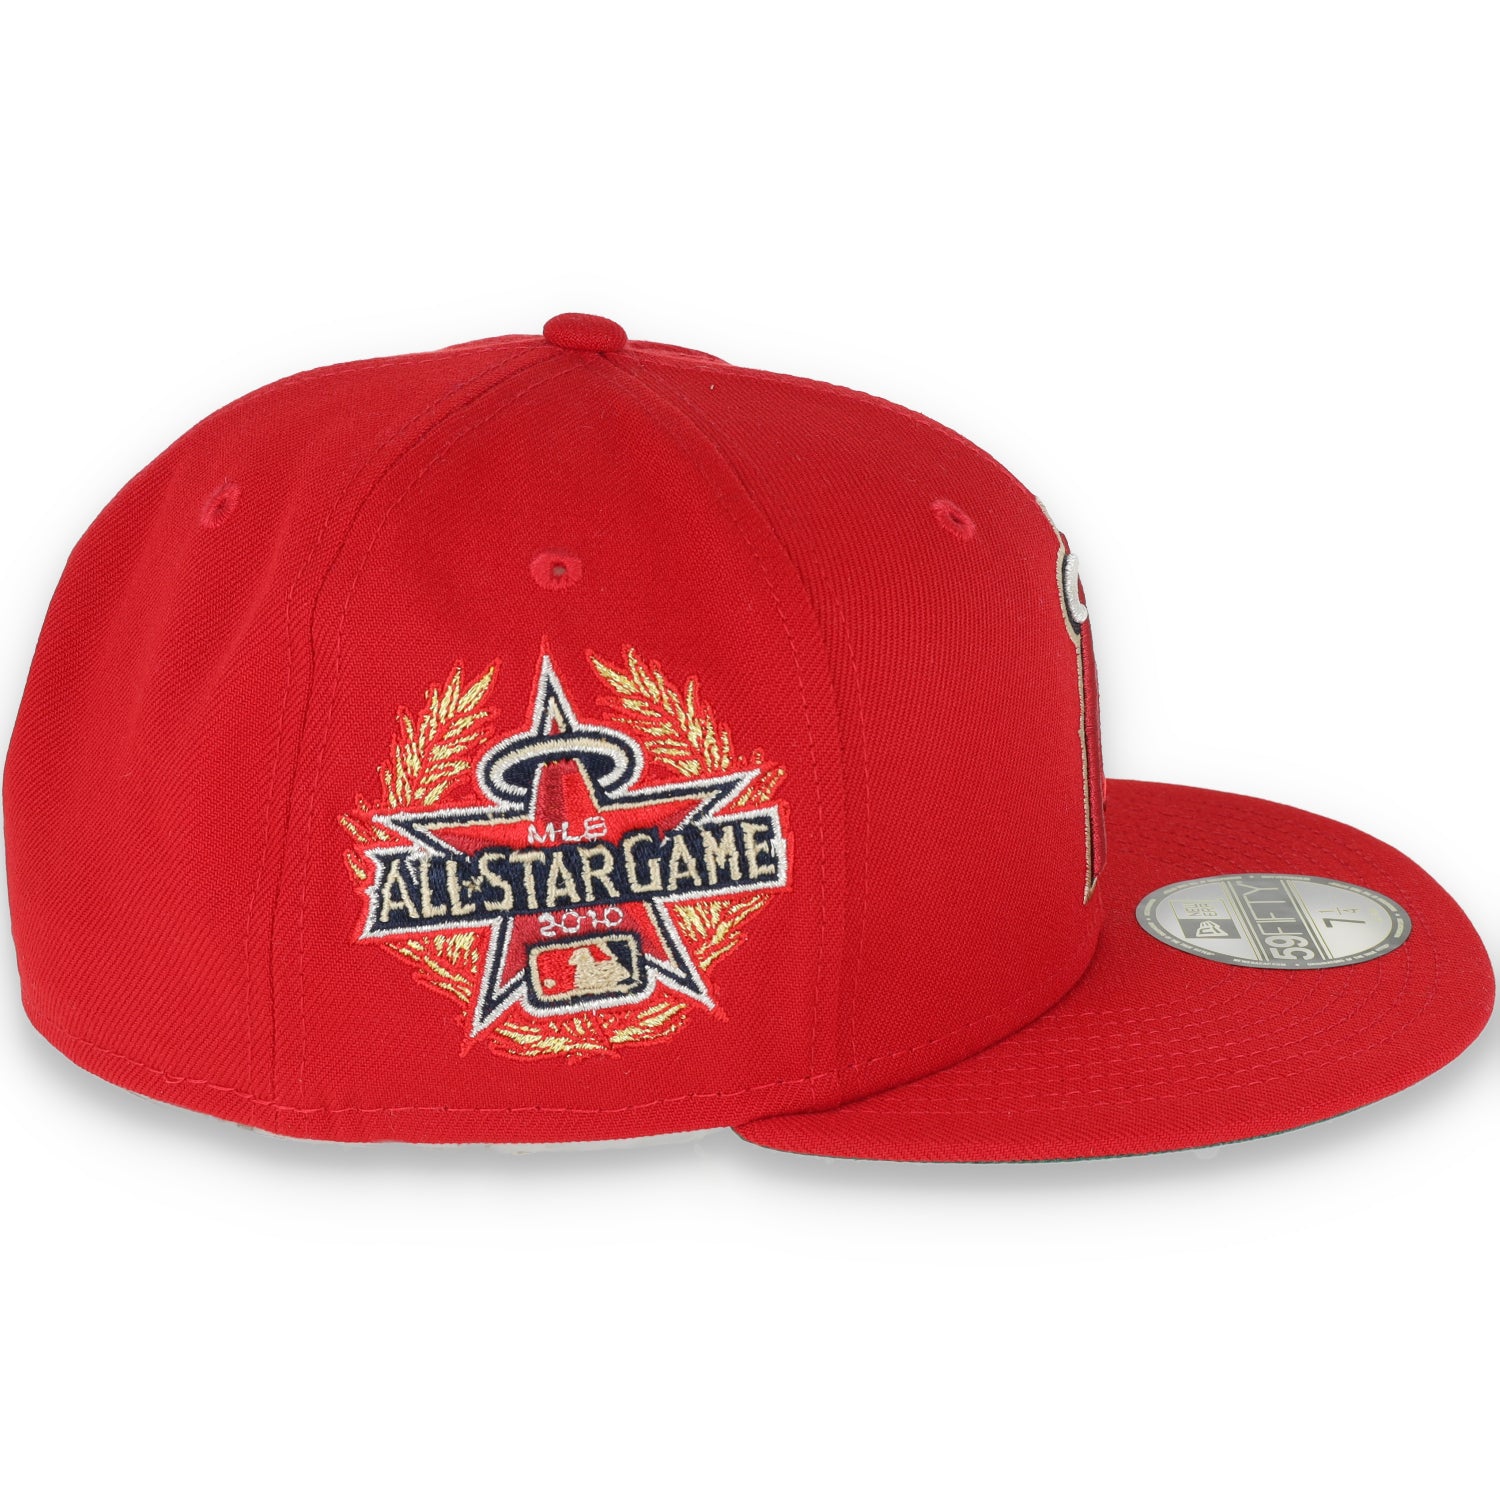 New Era Anaheim Angels Laurel All Star Game 2010 Side Patch 59fifty Fitted Cap-Red